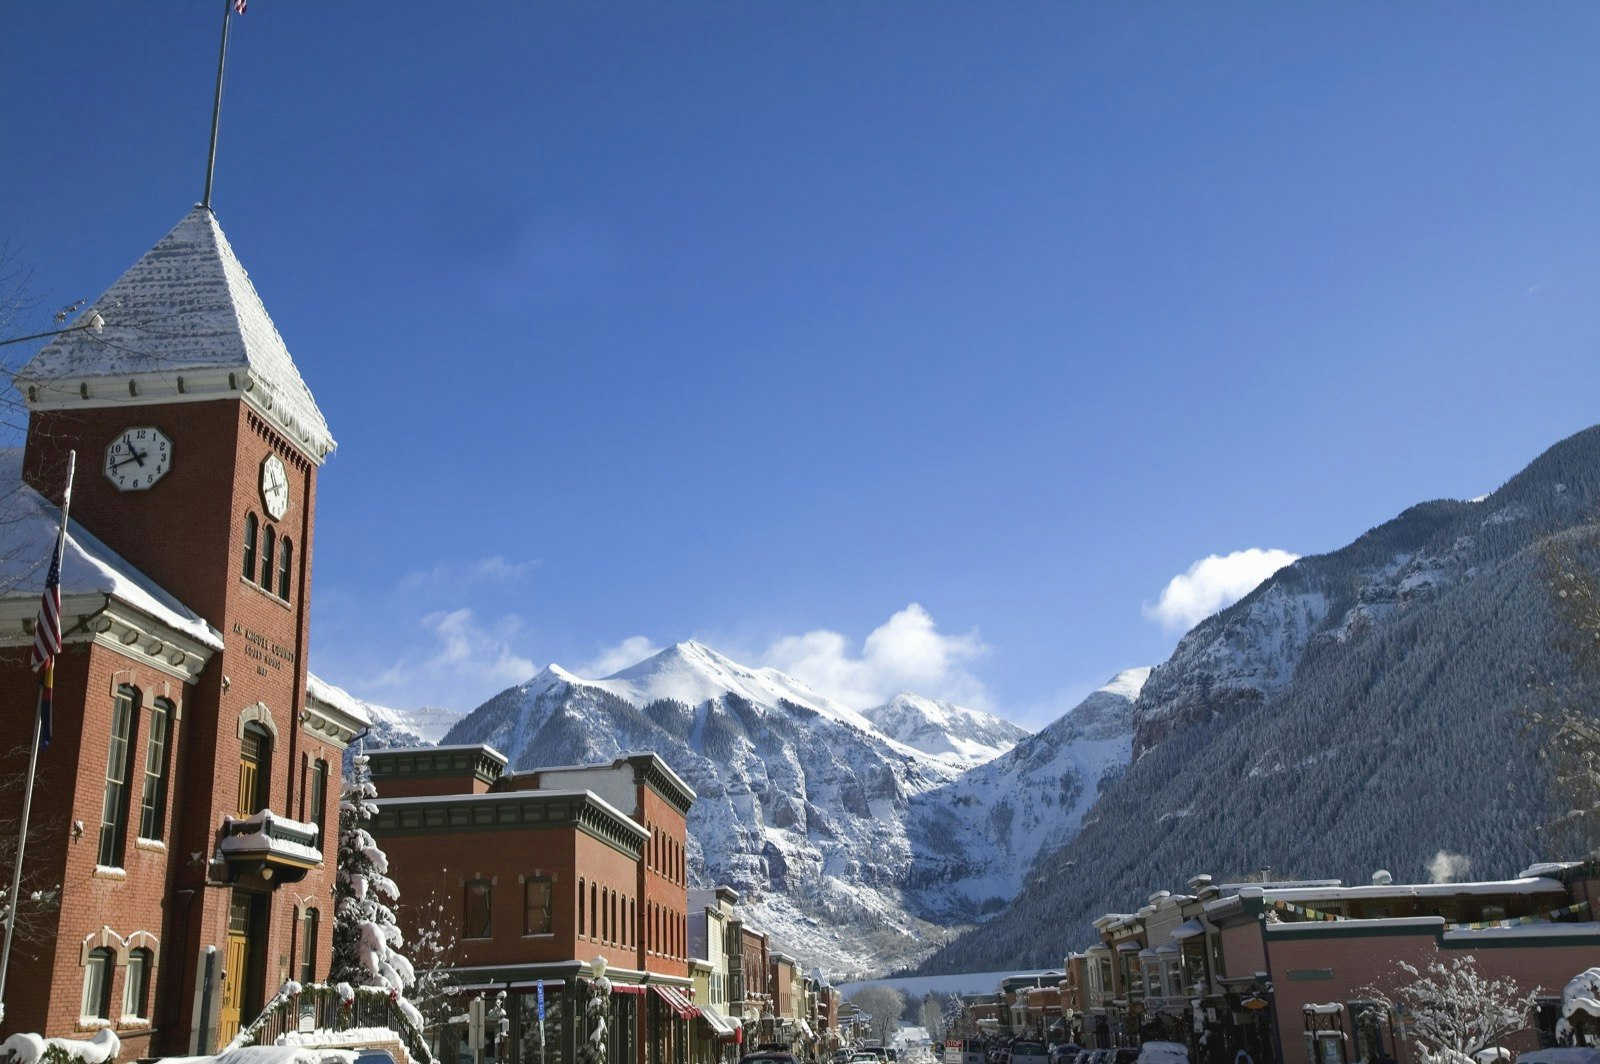 A huge snow covered mountain stretches beyond the historical buildings of main street Telluride, Colorado